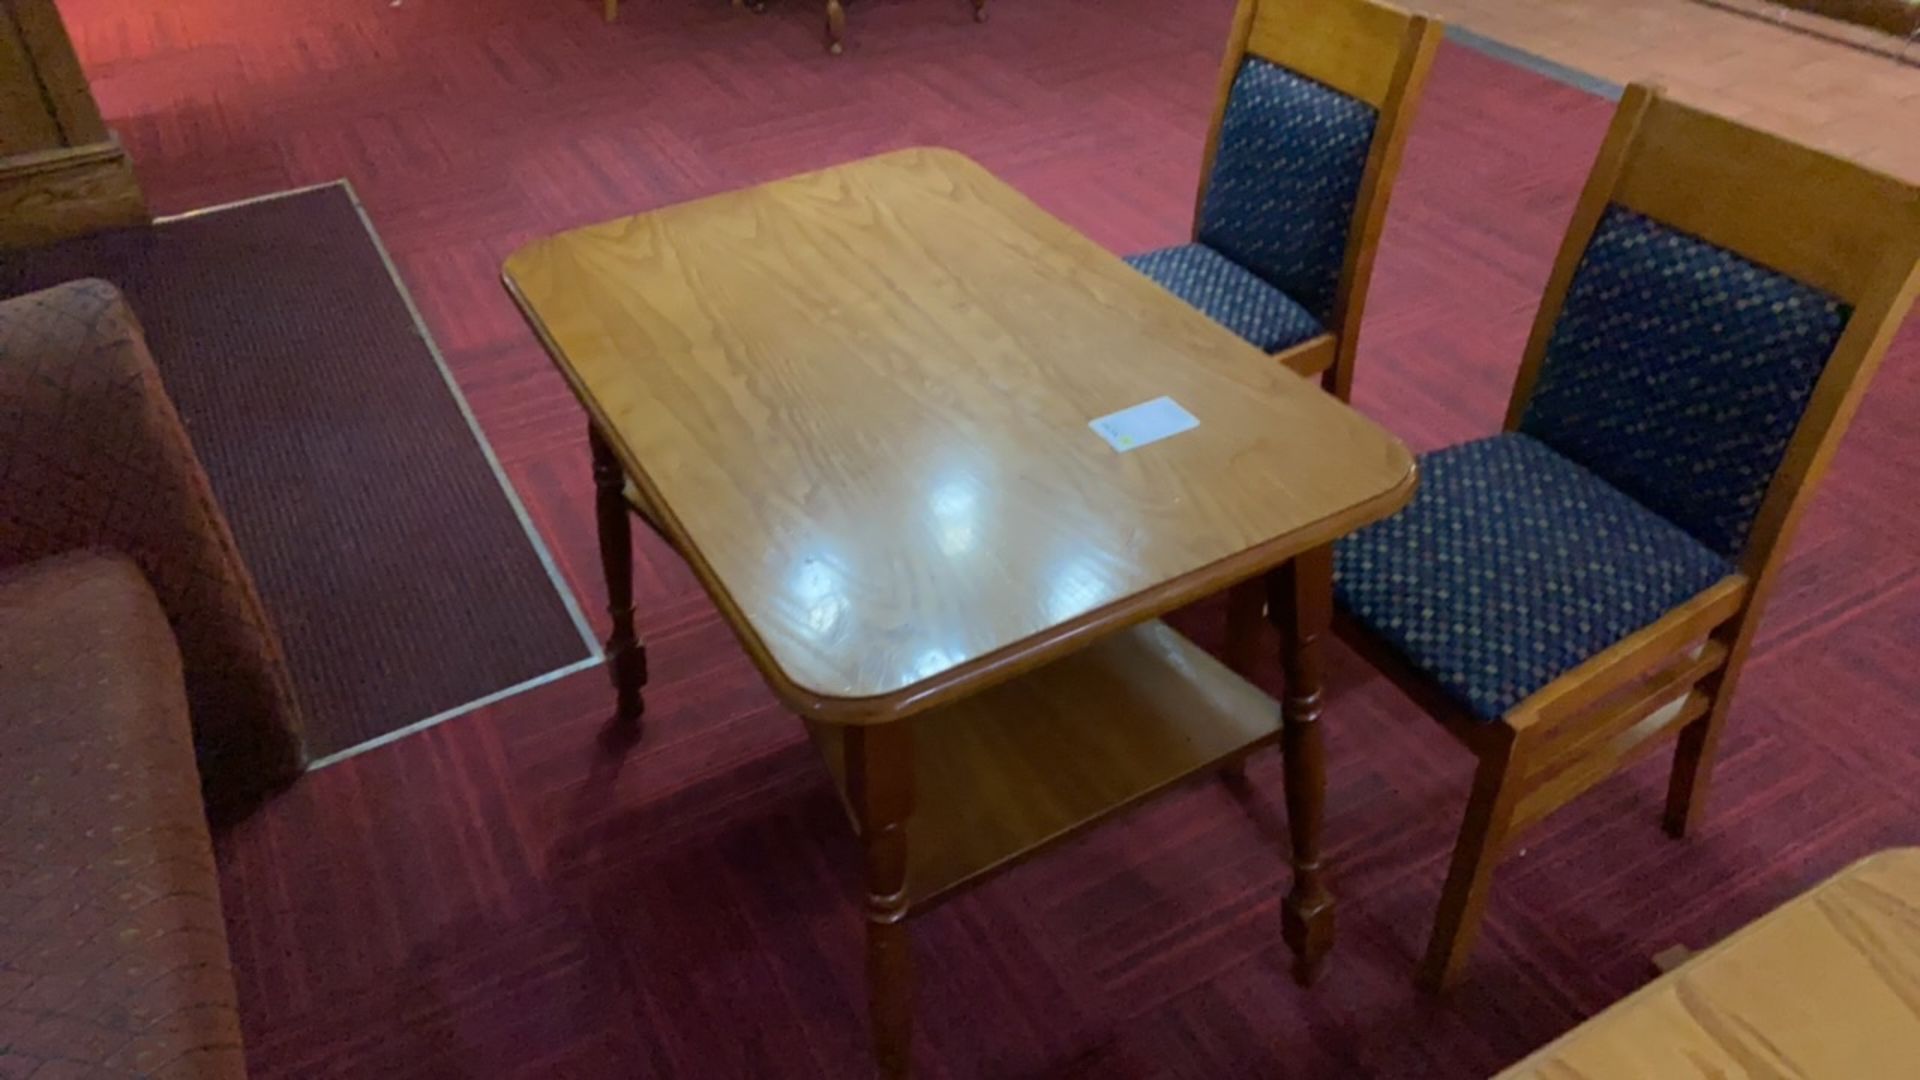 Wooden Rectangular Table With Two Wooden Framed Chairs - Image 3 of 3